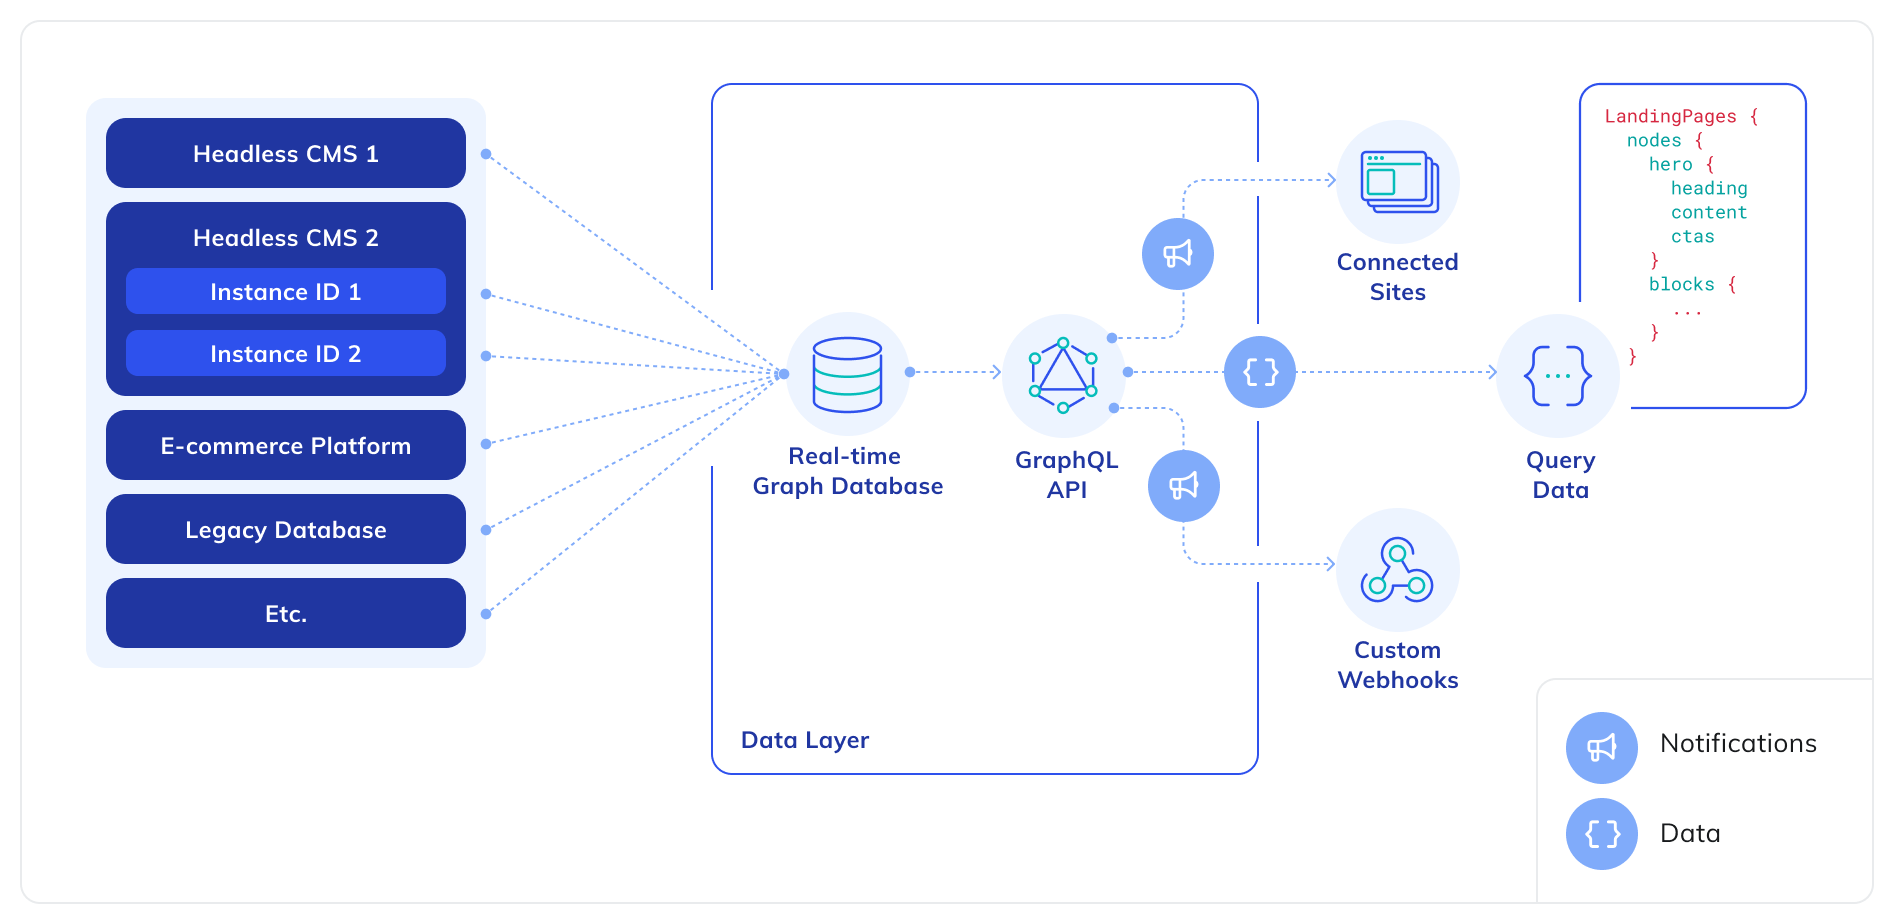 Diagram illustrating the parts of a data layer, and how data and notifications flow through the data layer to your sites and webhooks.